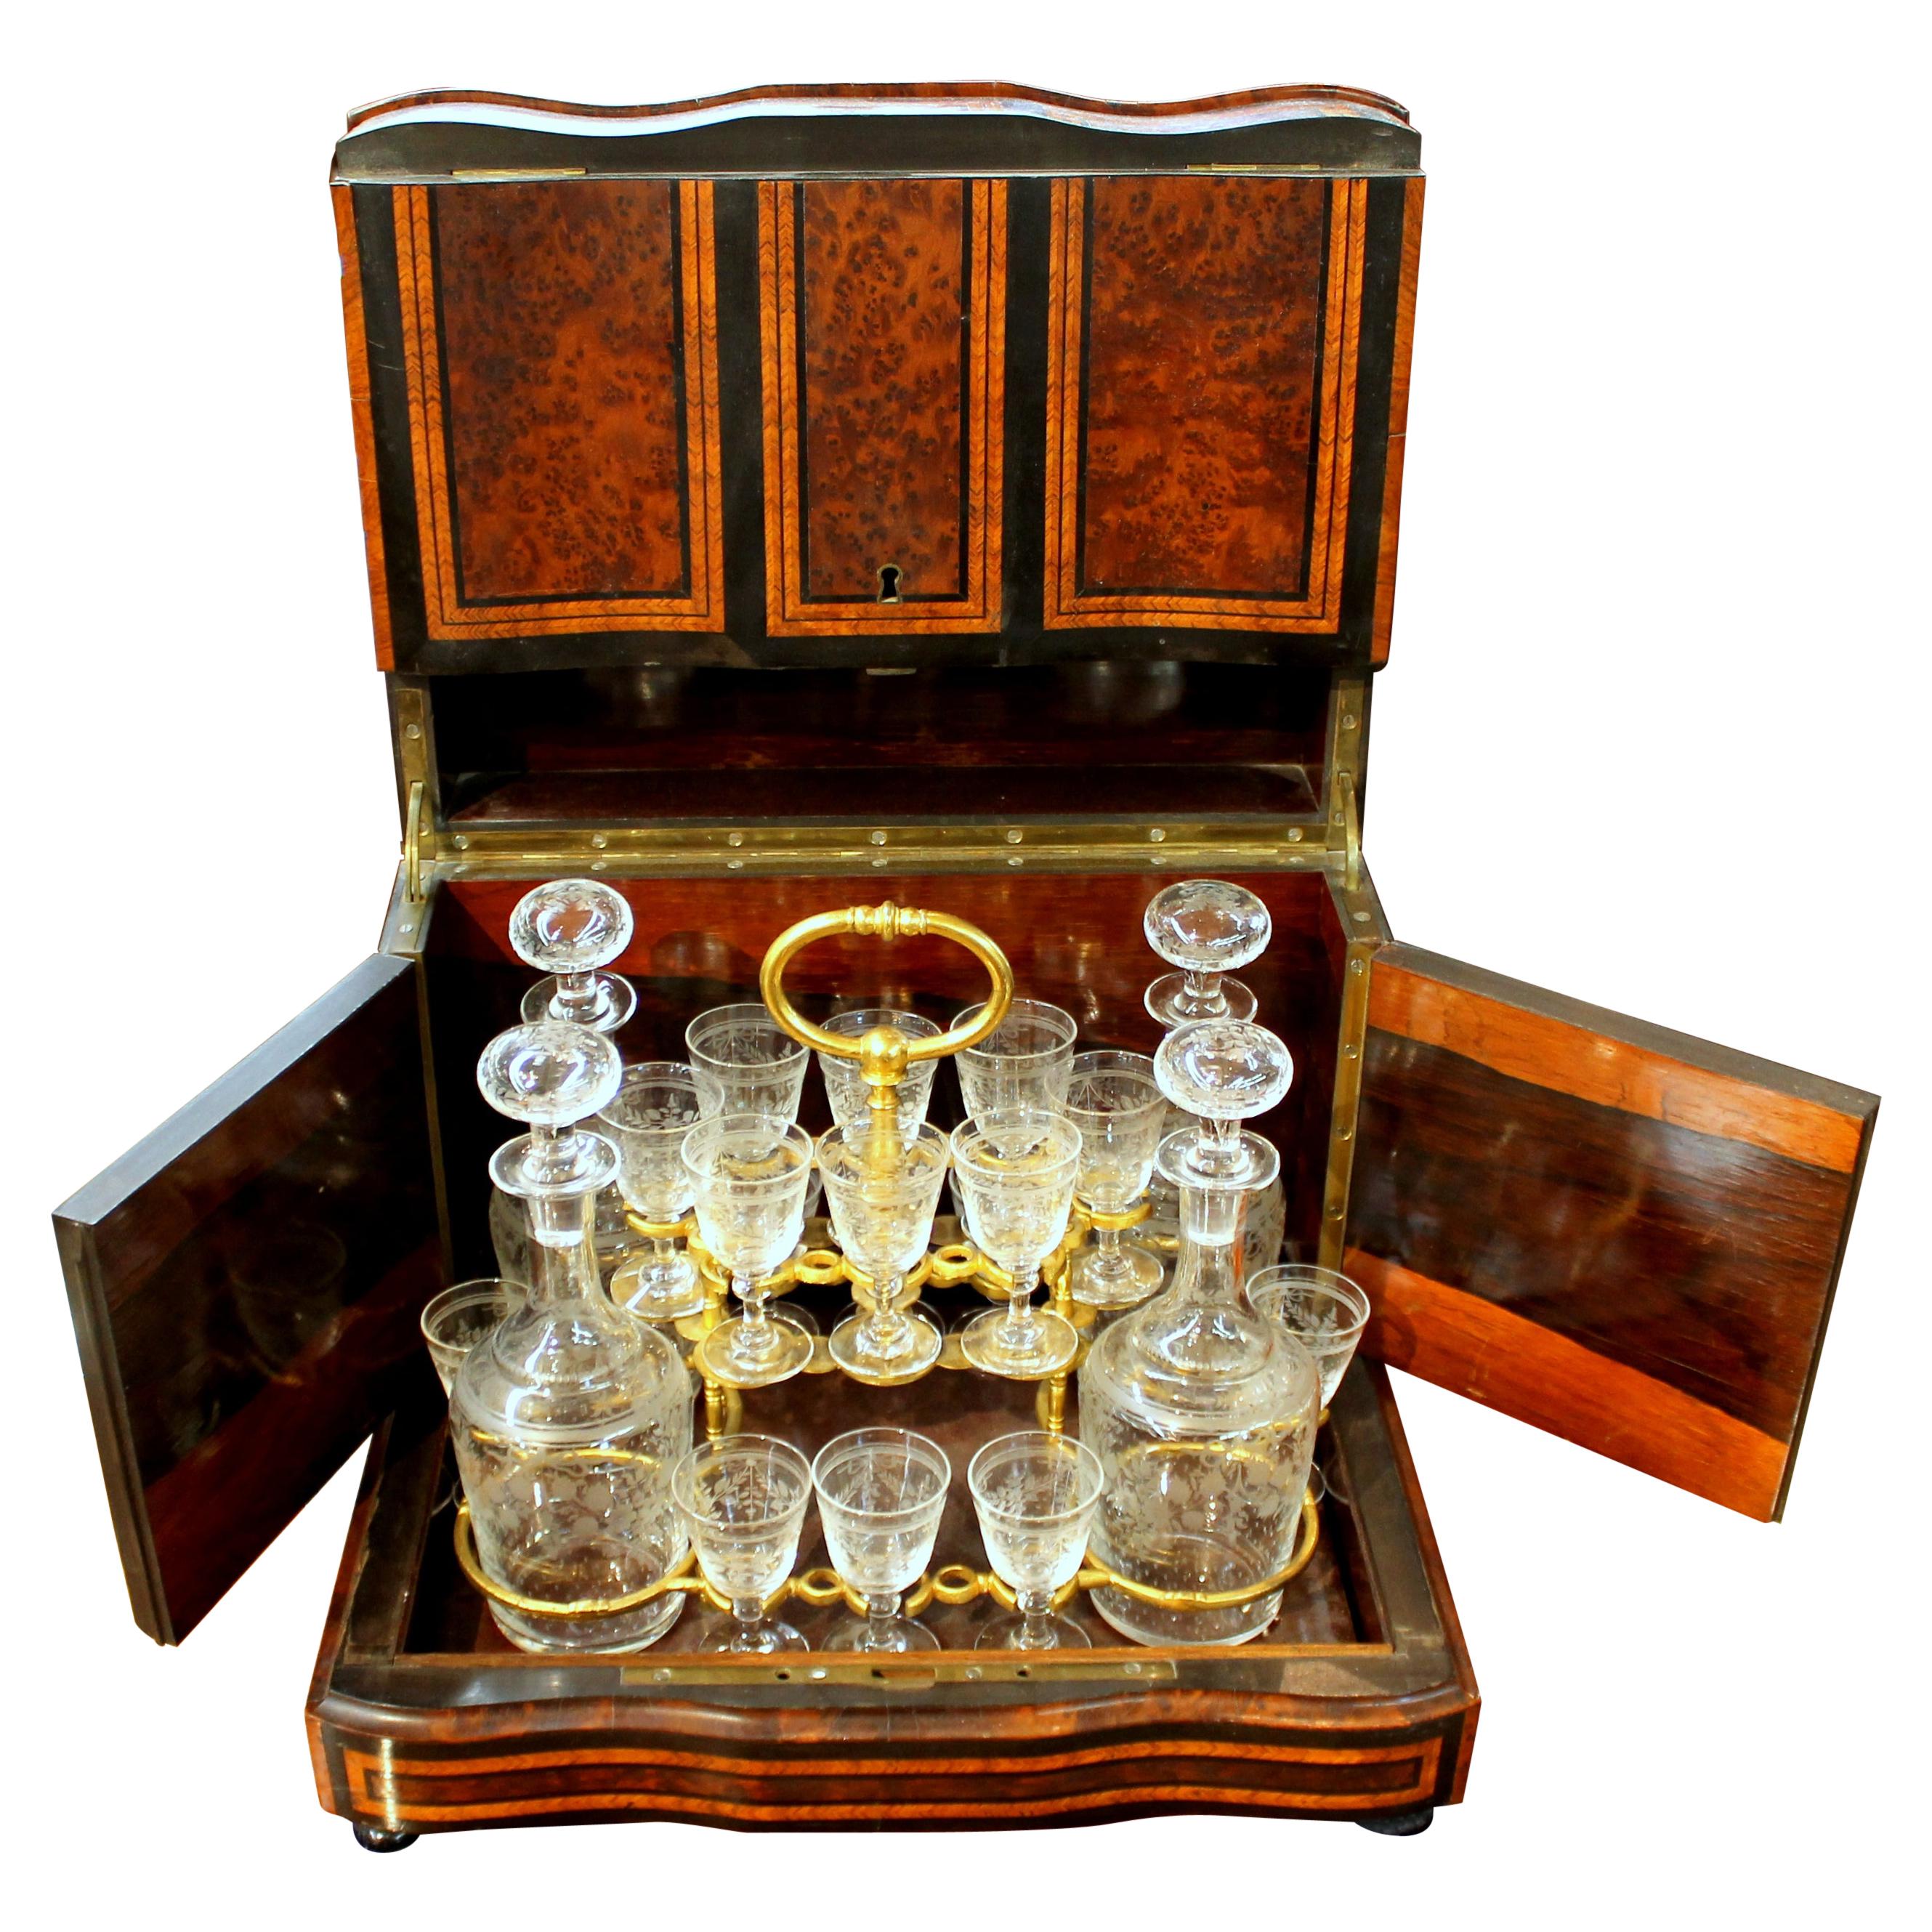 Antique French Engraved Crystal Cave a' Liqueur Tantalus Set in Amboyna Case